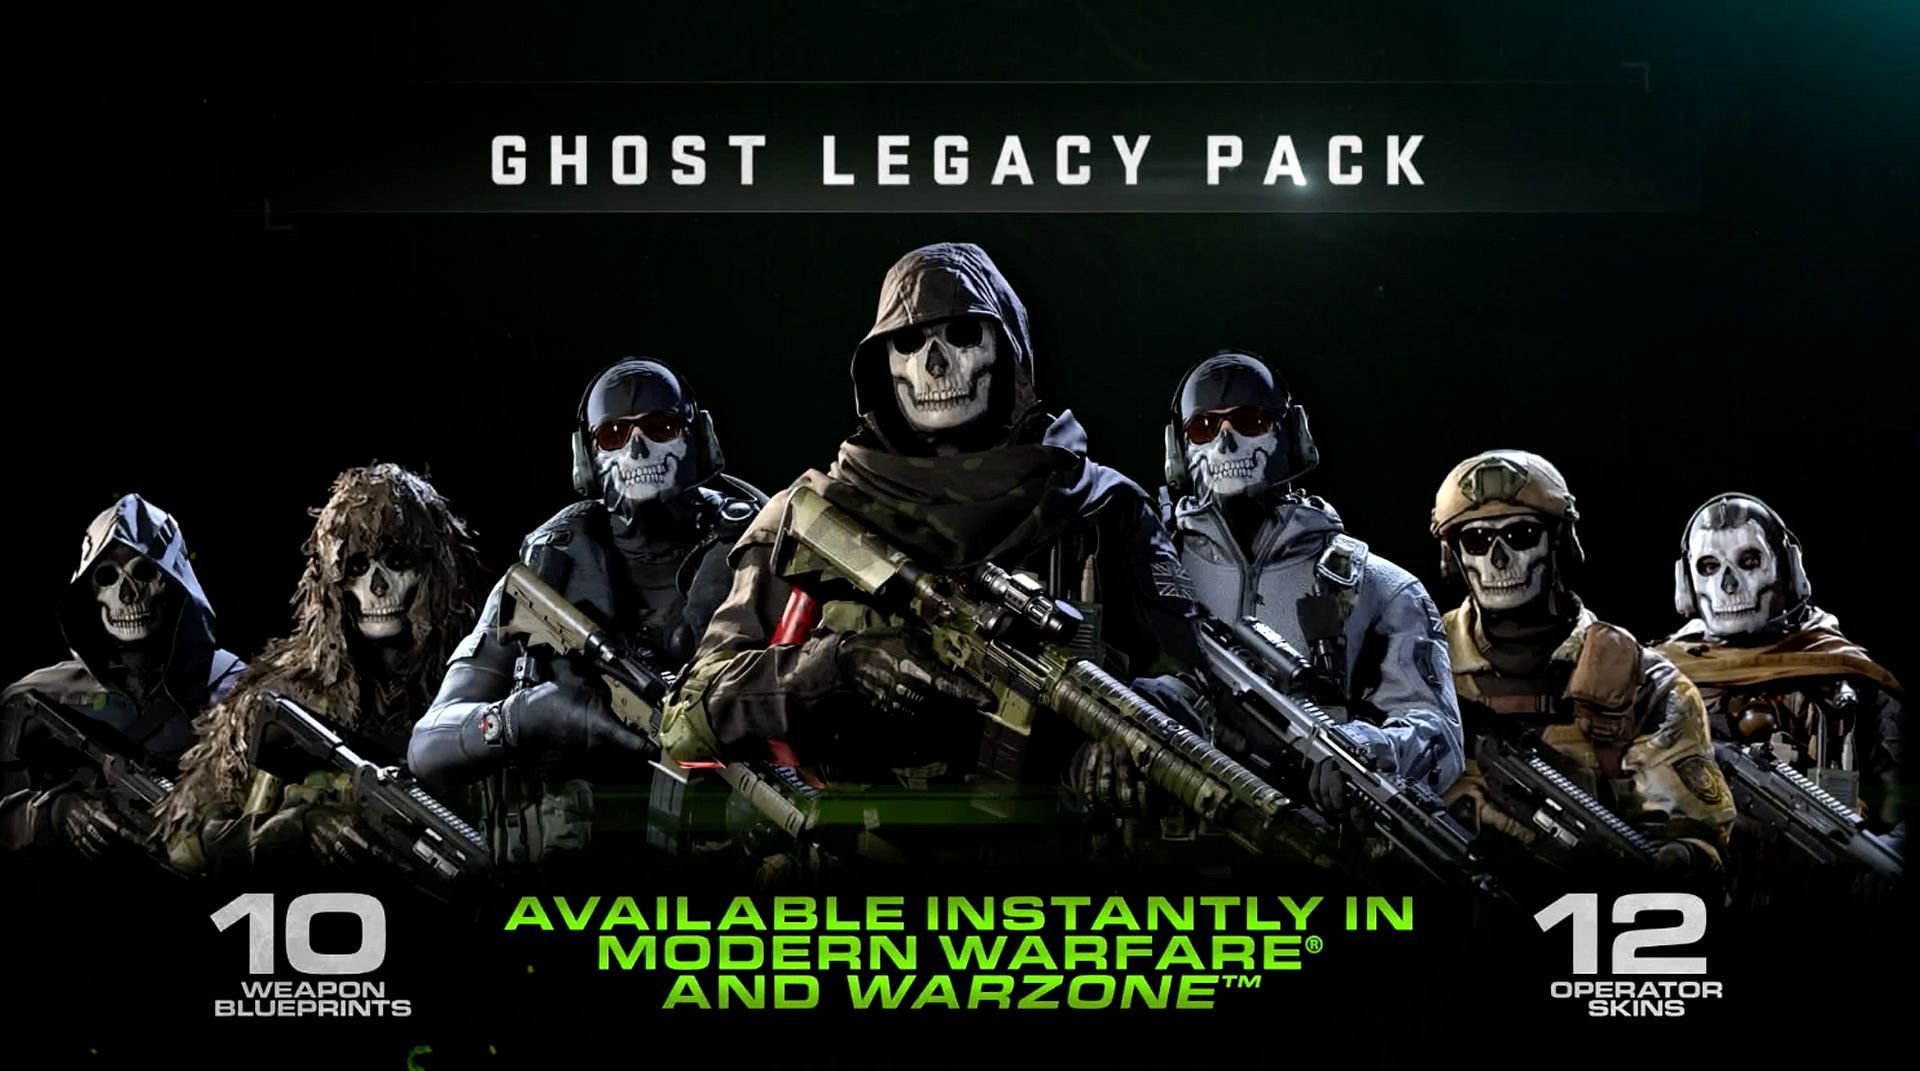 Ghost Legacy Pack (image via Activision)